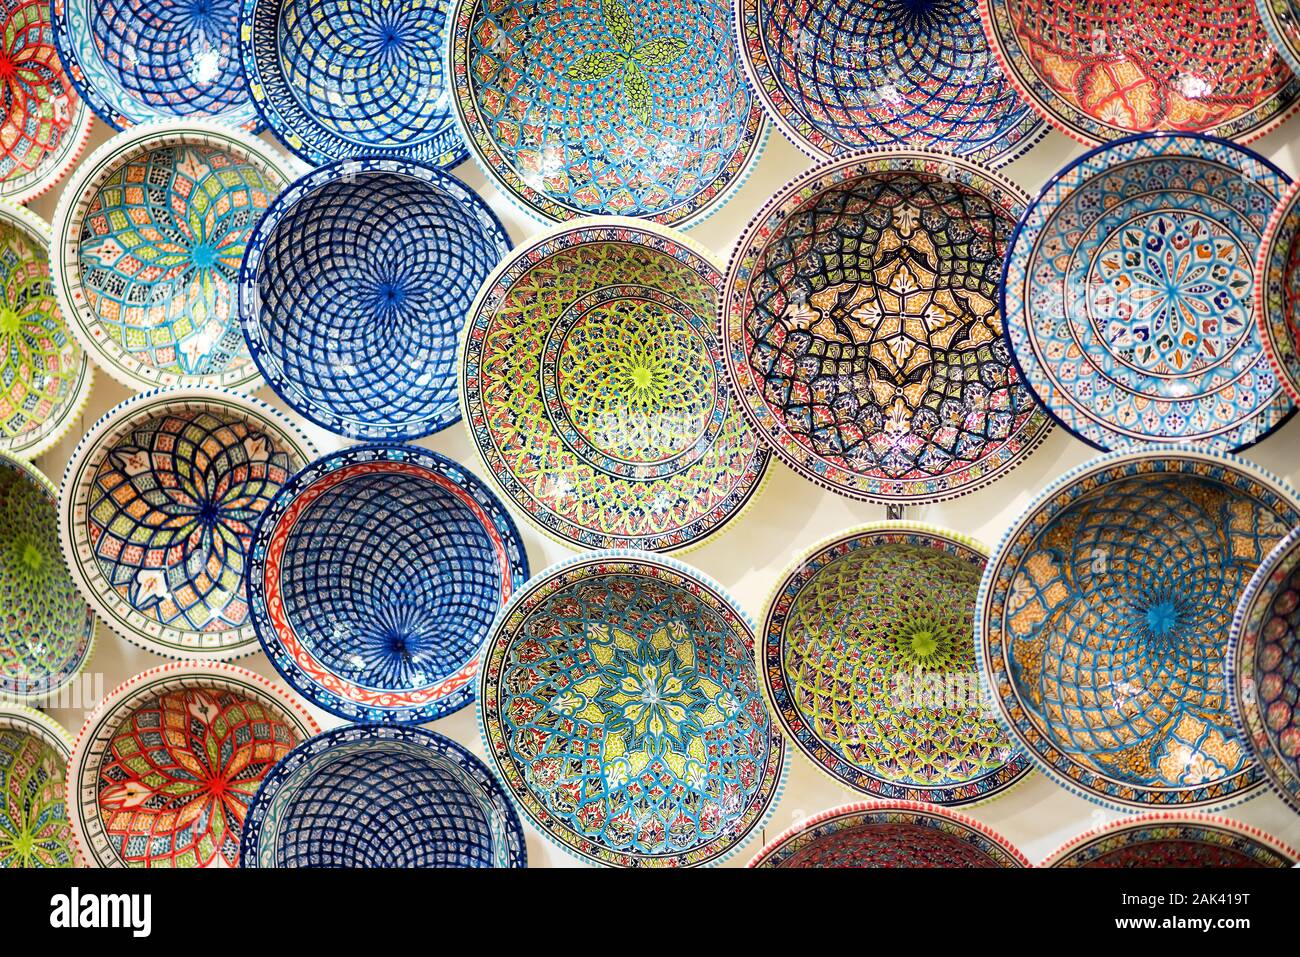 Assortment of decorated glazed handcrafted pottery bowls in different colors and design patterns viewed from above as a full frame background Stock Photo